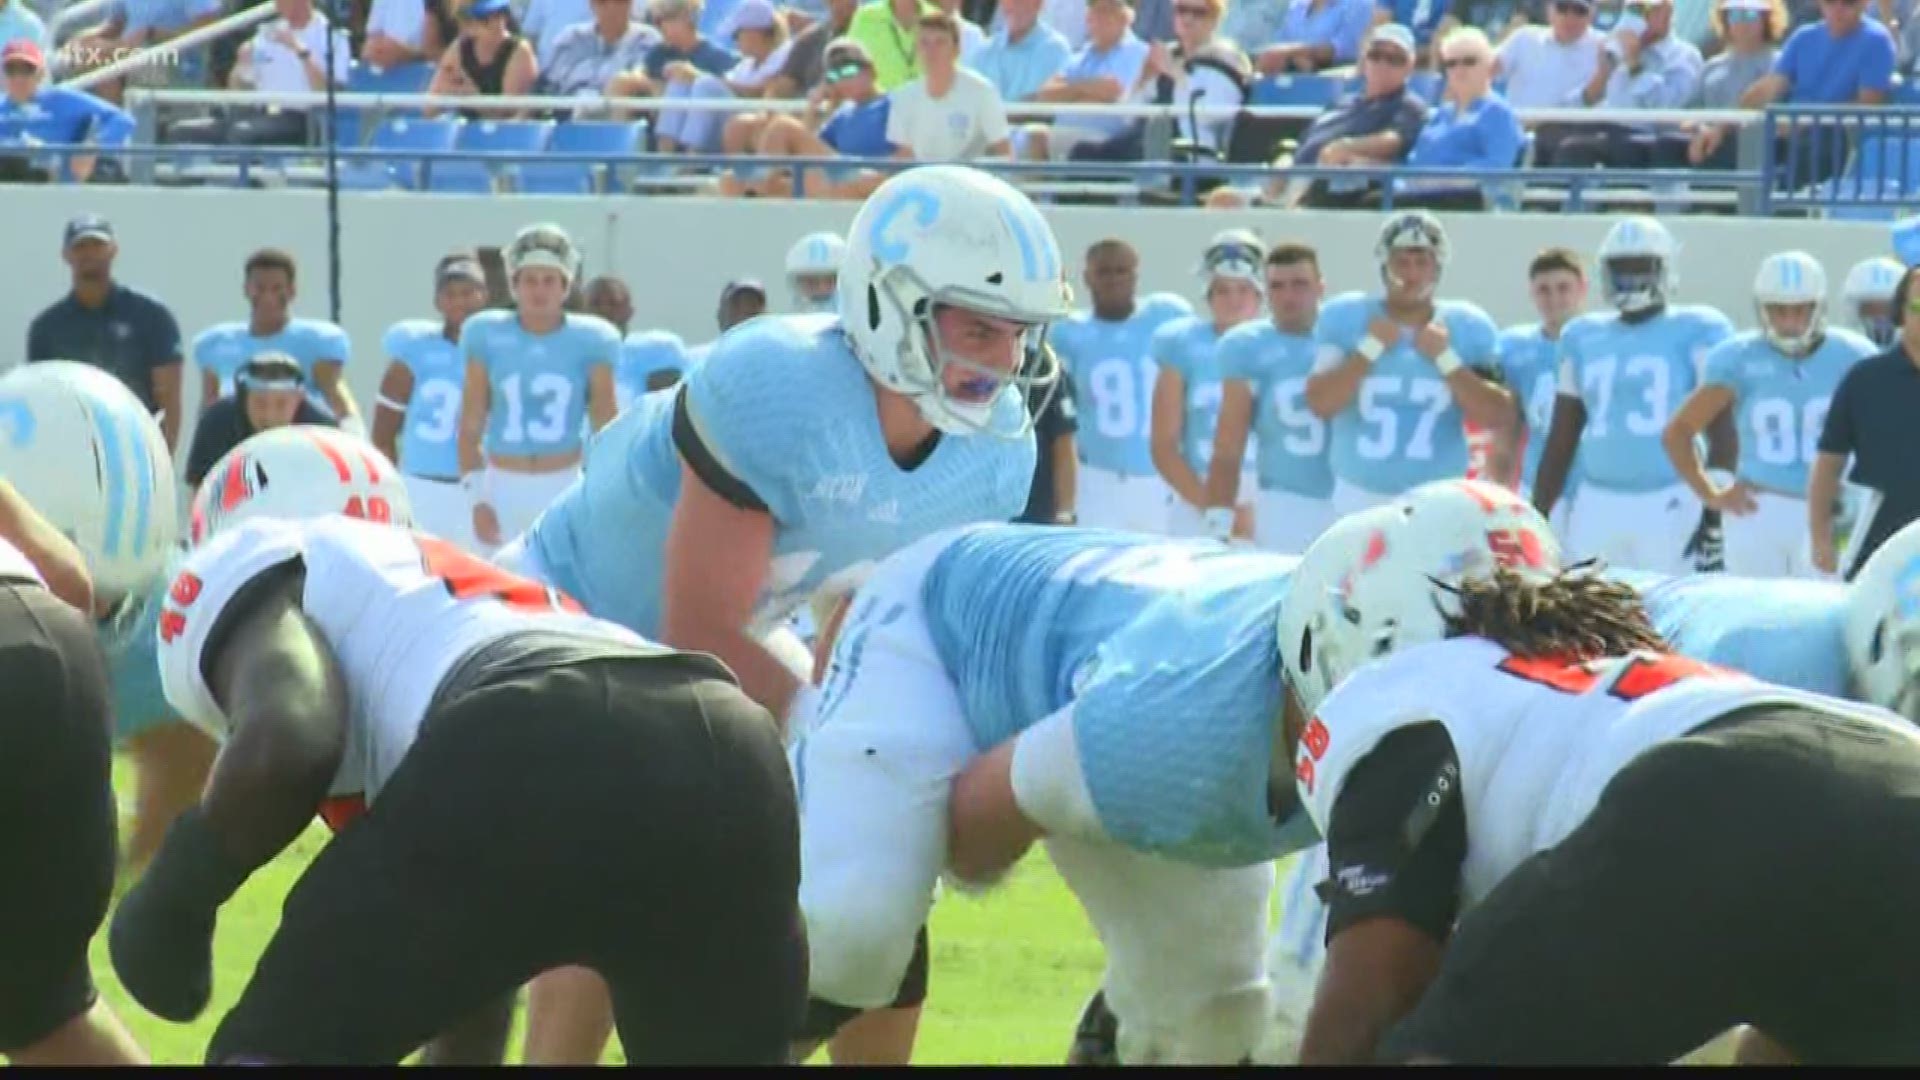 On Homecoming, the Citadel Bulldogs win their third straight game, 35-24 over Mercer.